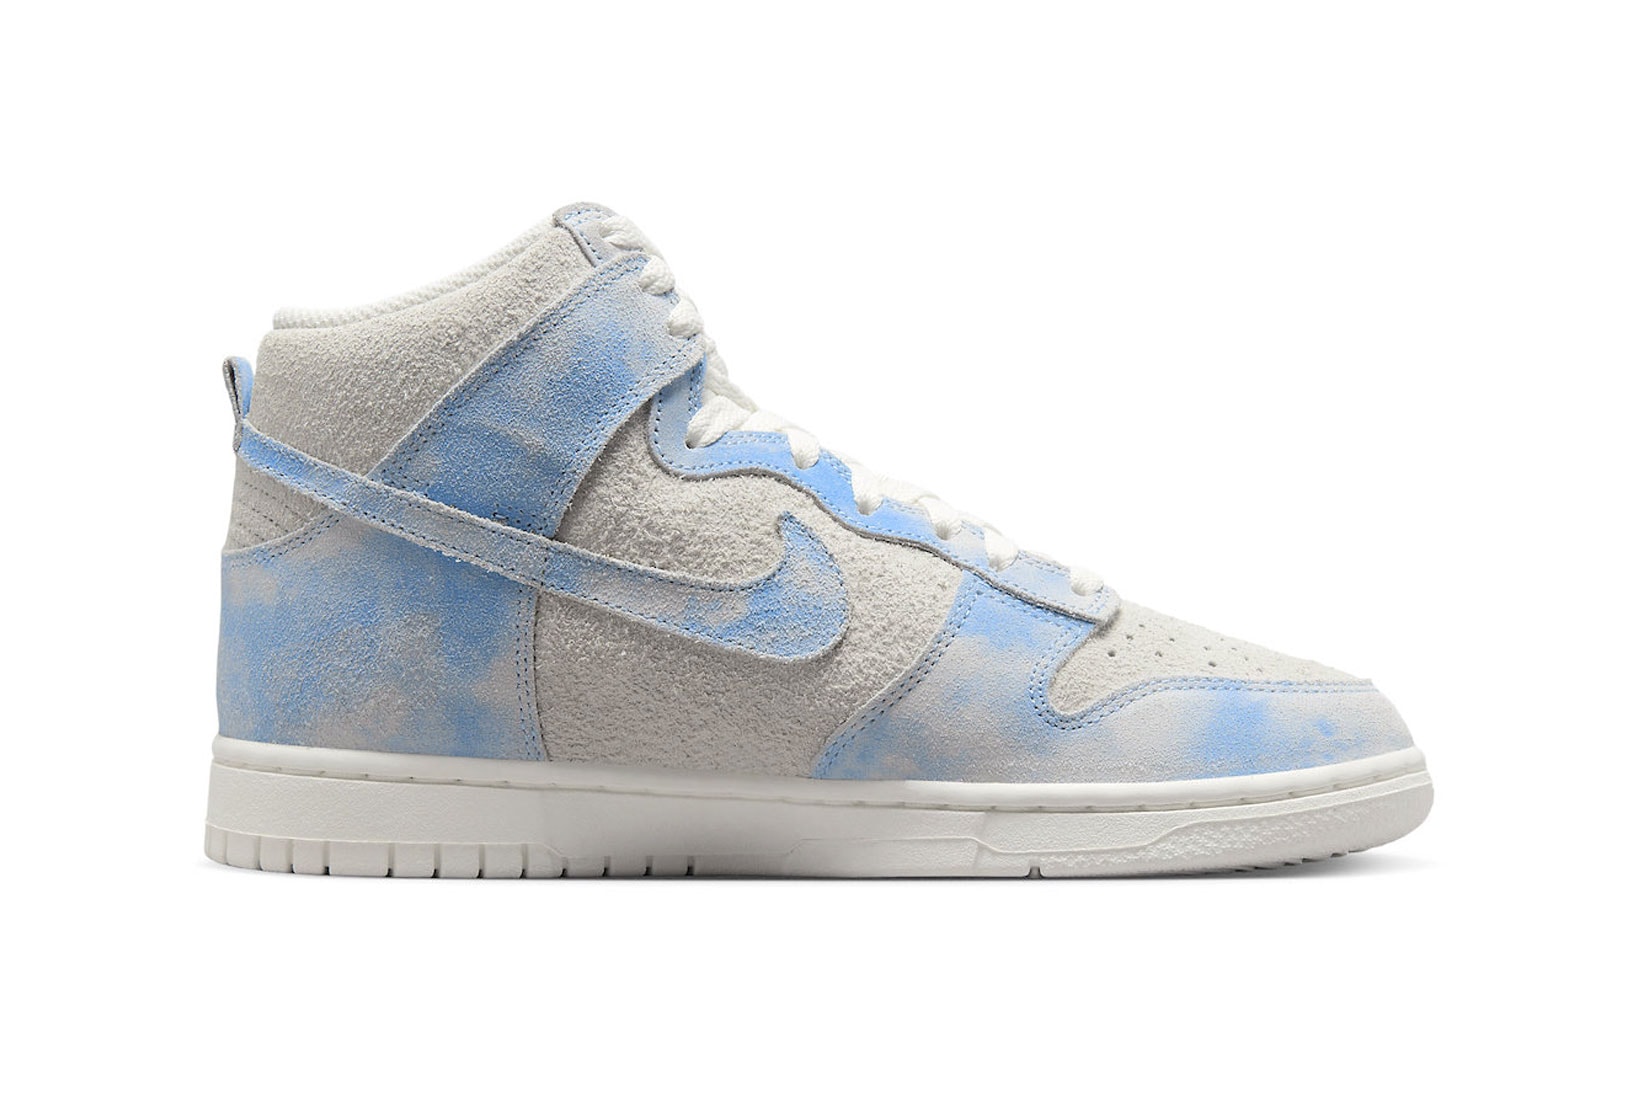 Nike Dunk High "Clouds" Images, University Blue Sail Release Date Info